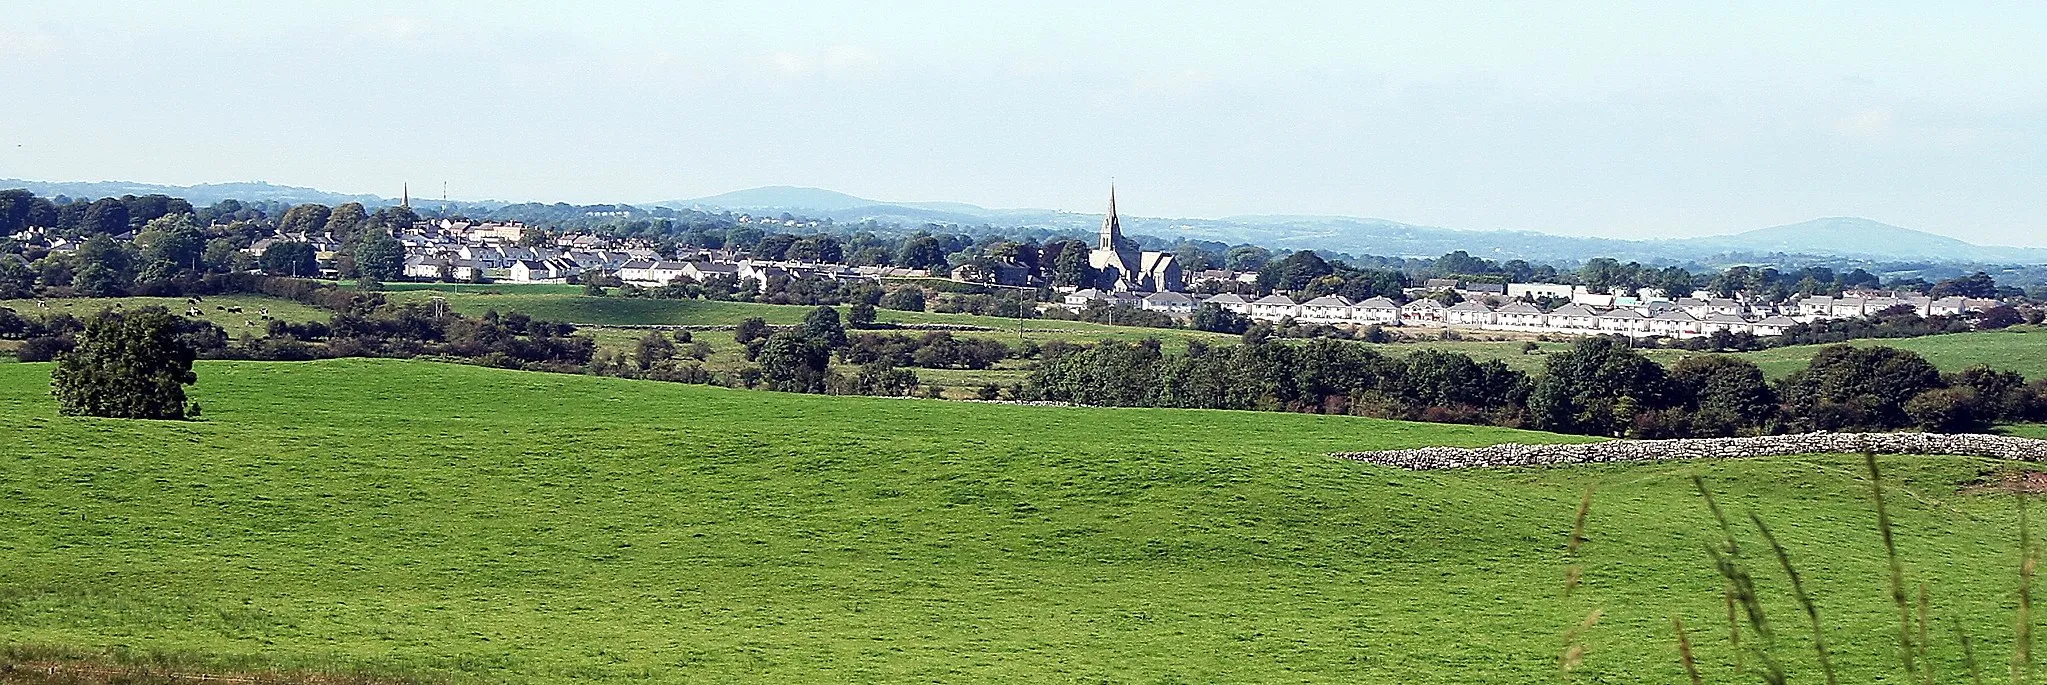 Photo showing: Oldcastle, County Meath, Ireland